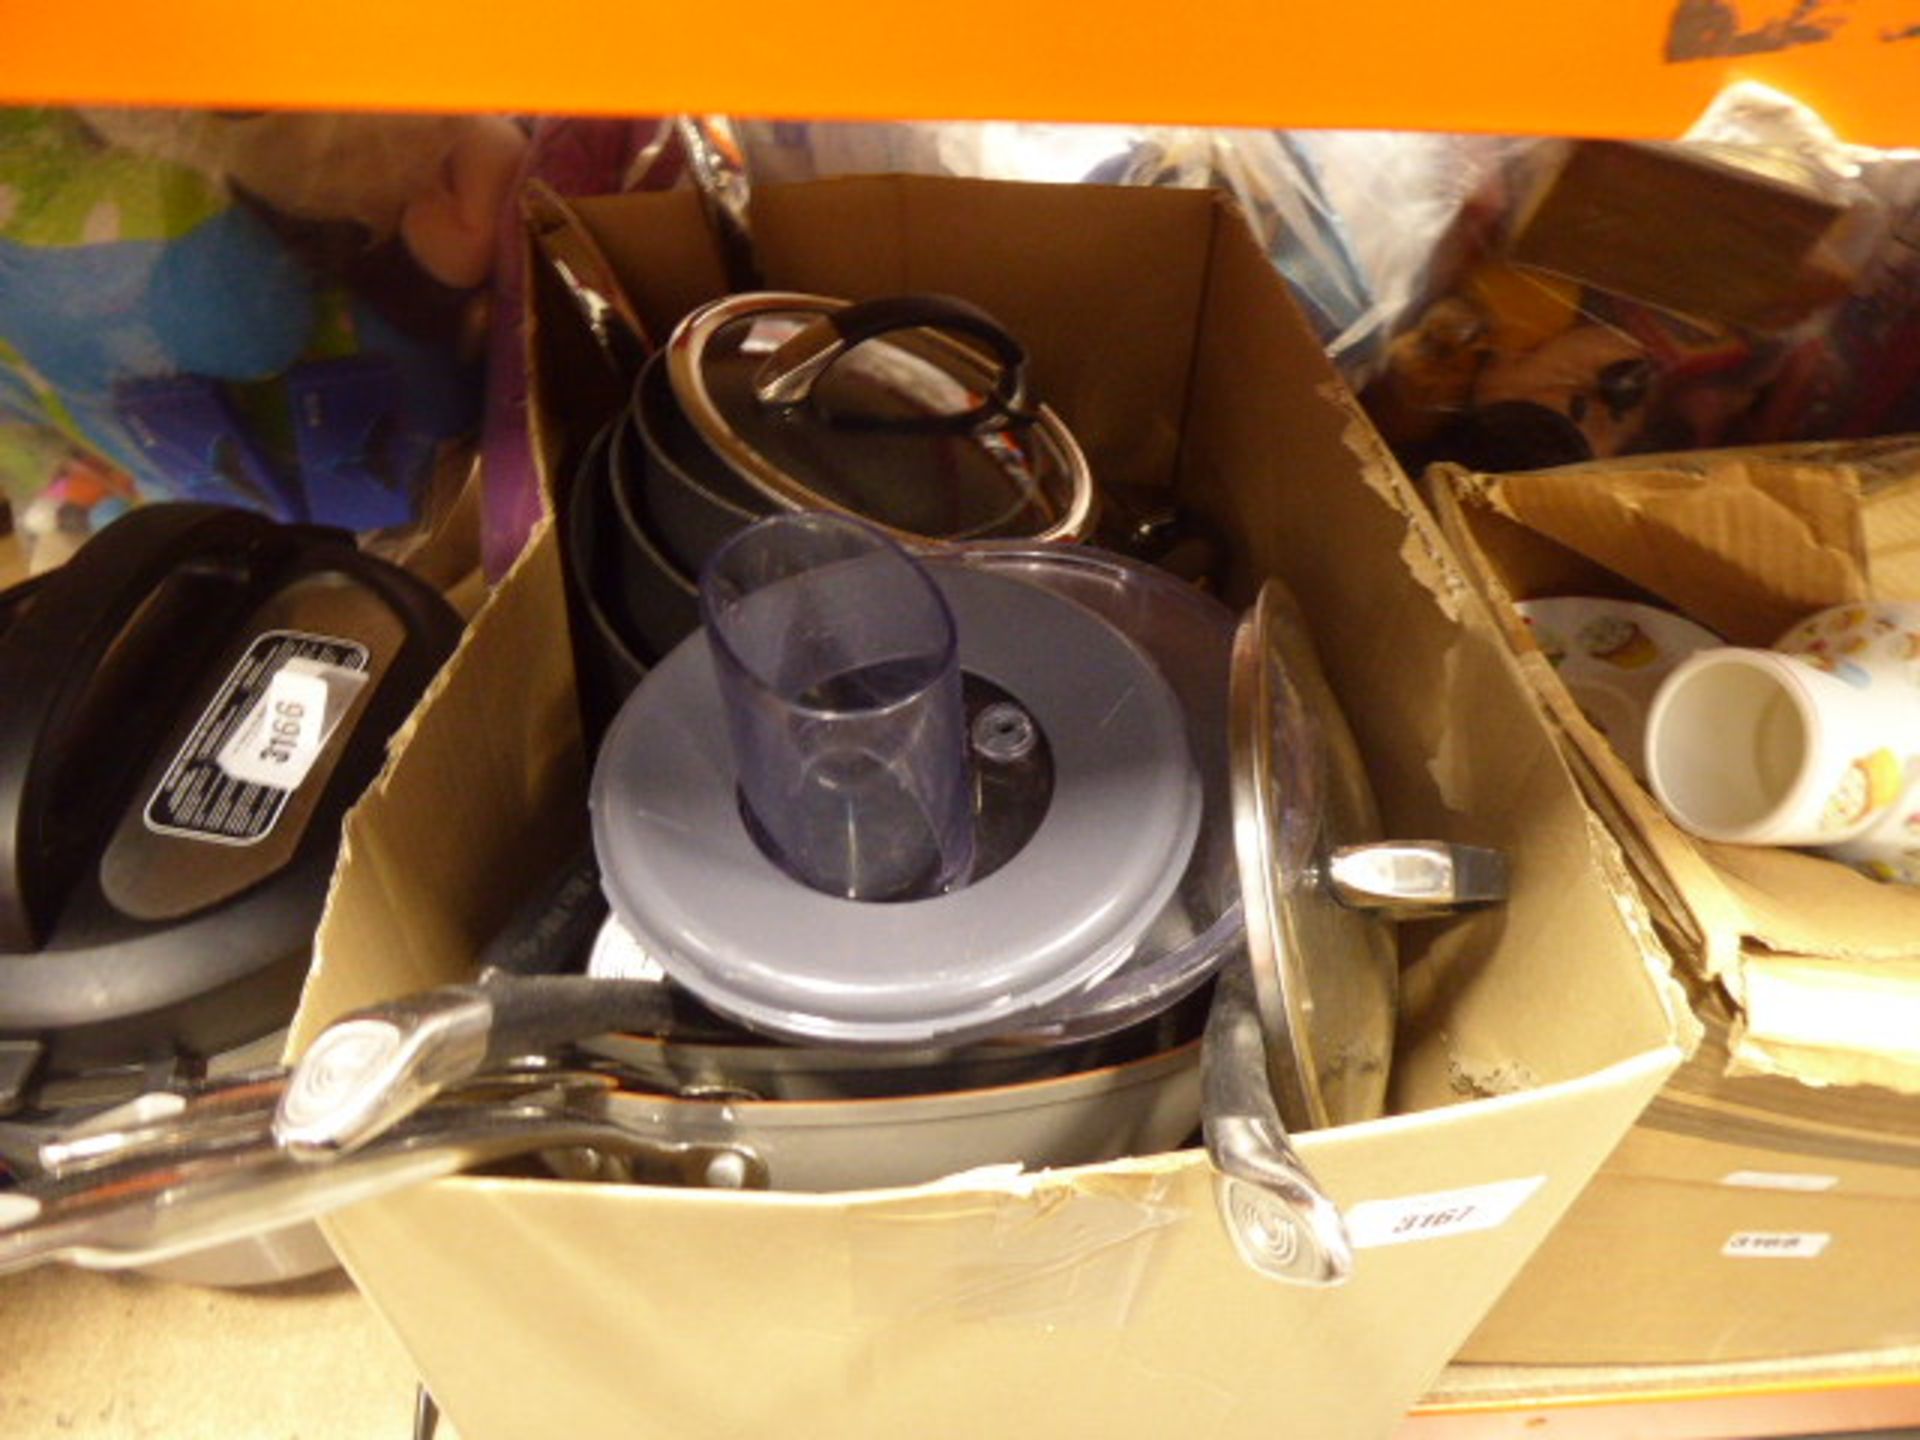 Box containing mixed kitchenware including pans, pots, etc